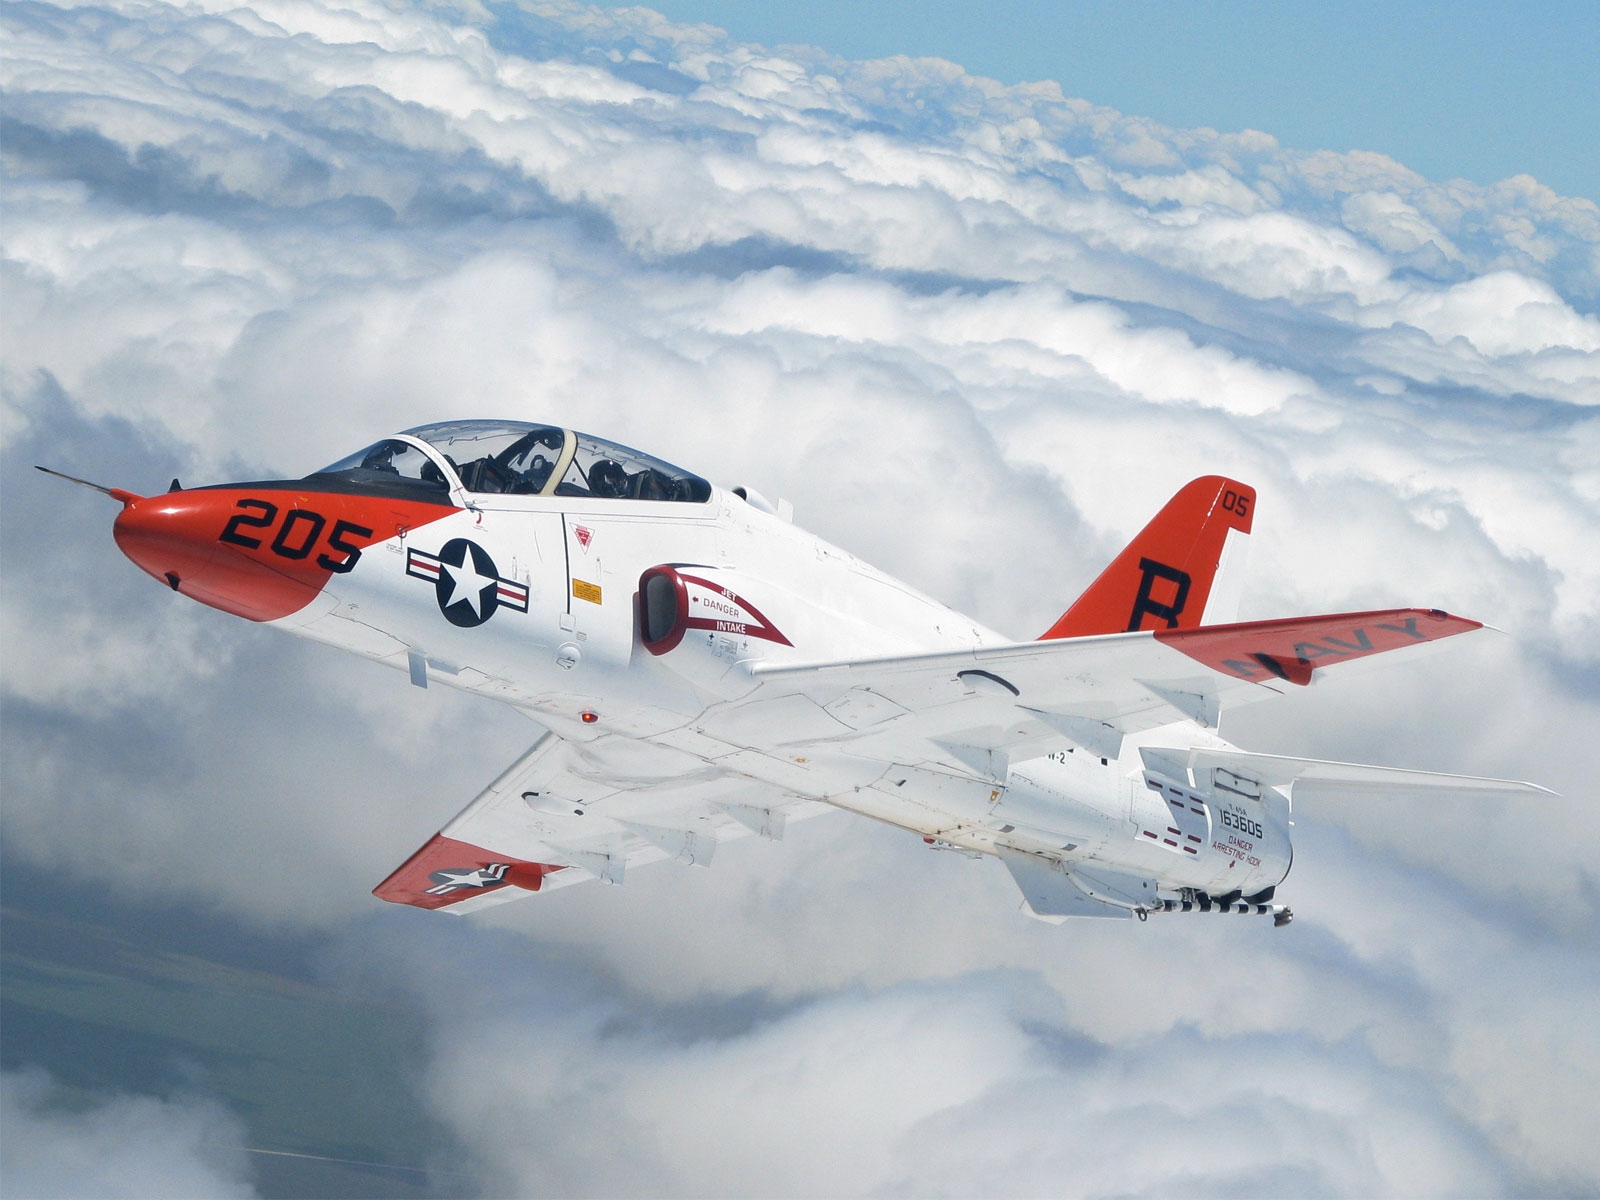 Download HQ Navy fighter above the clouds Military Airplanes wallpaper / 1600x1200